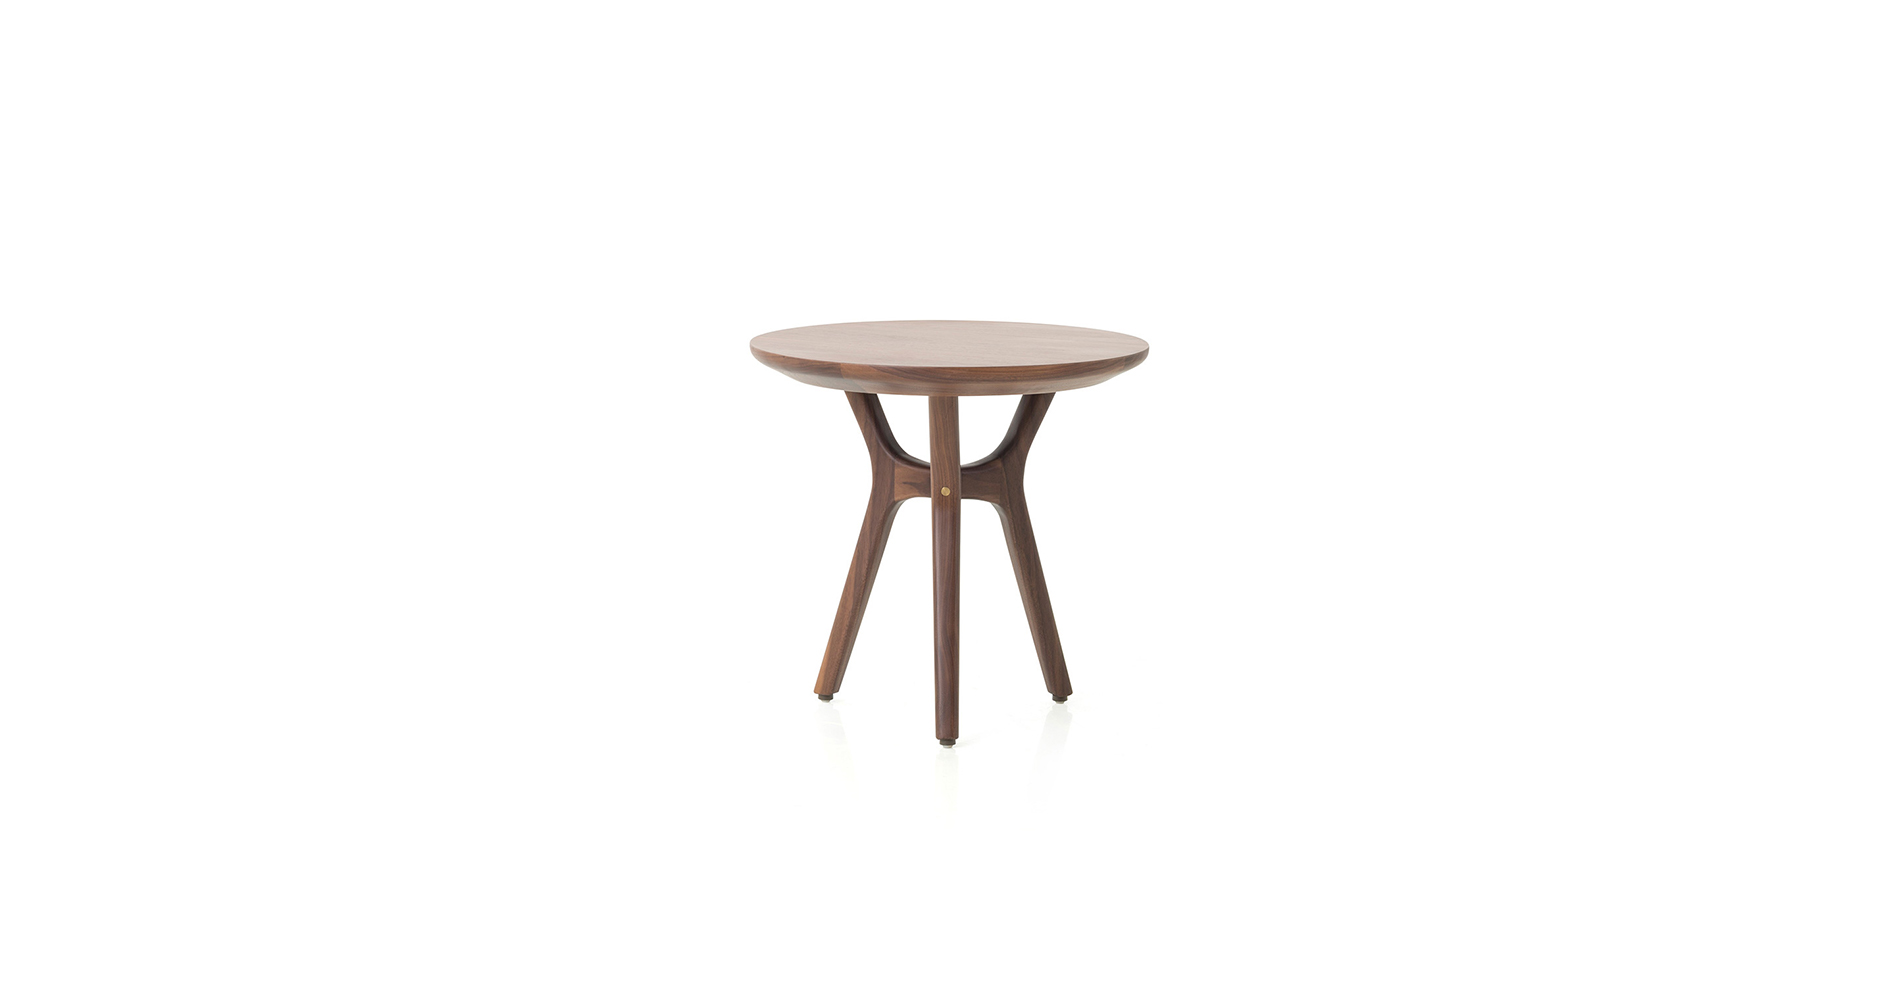 An image of Rén Side Table